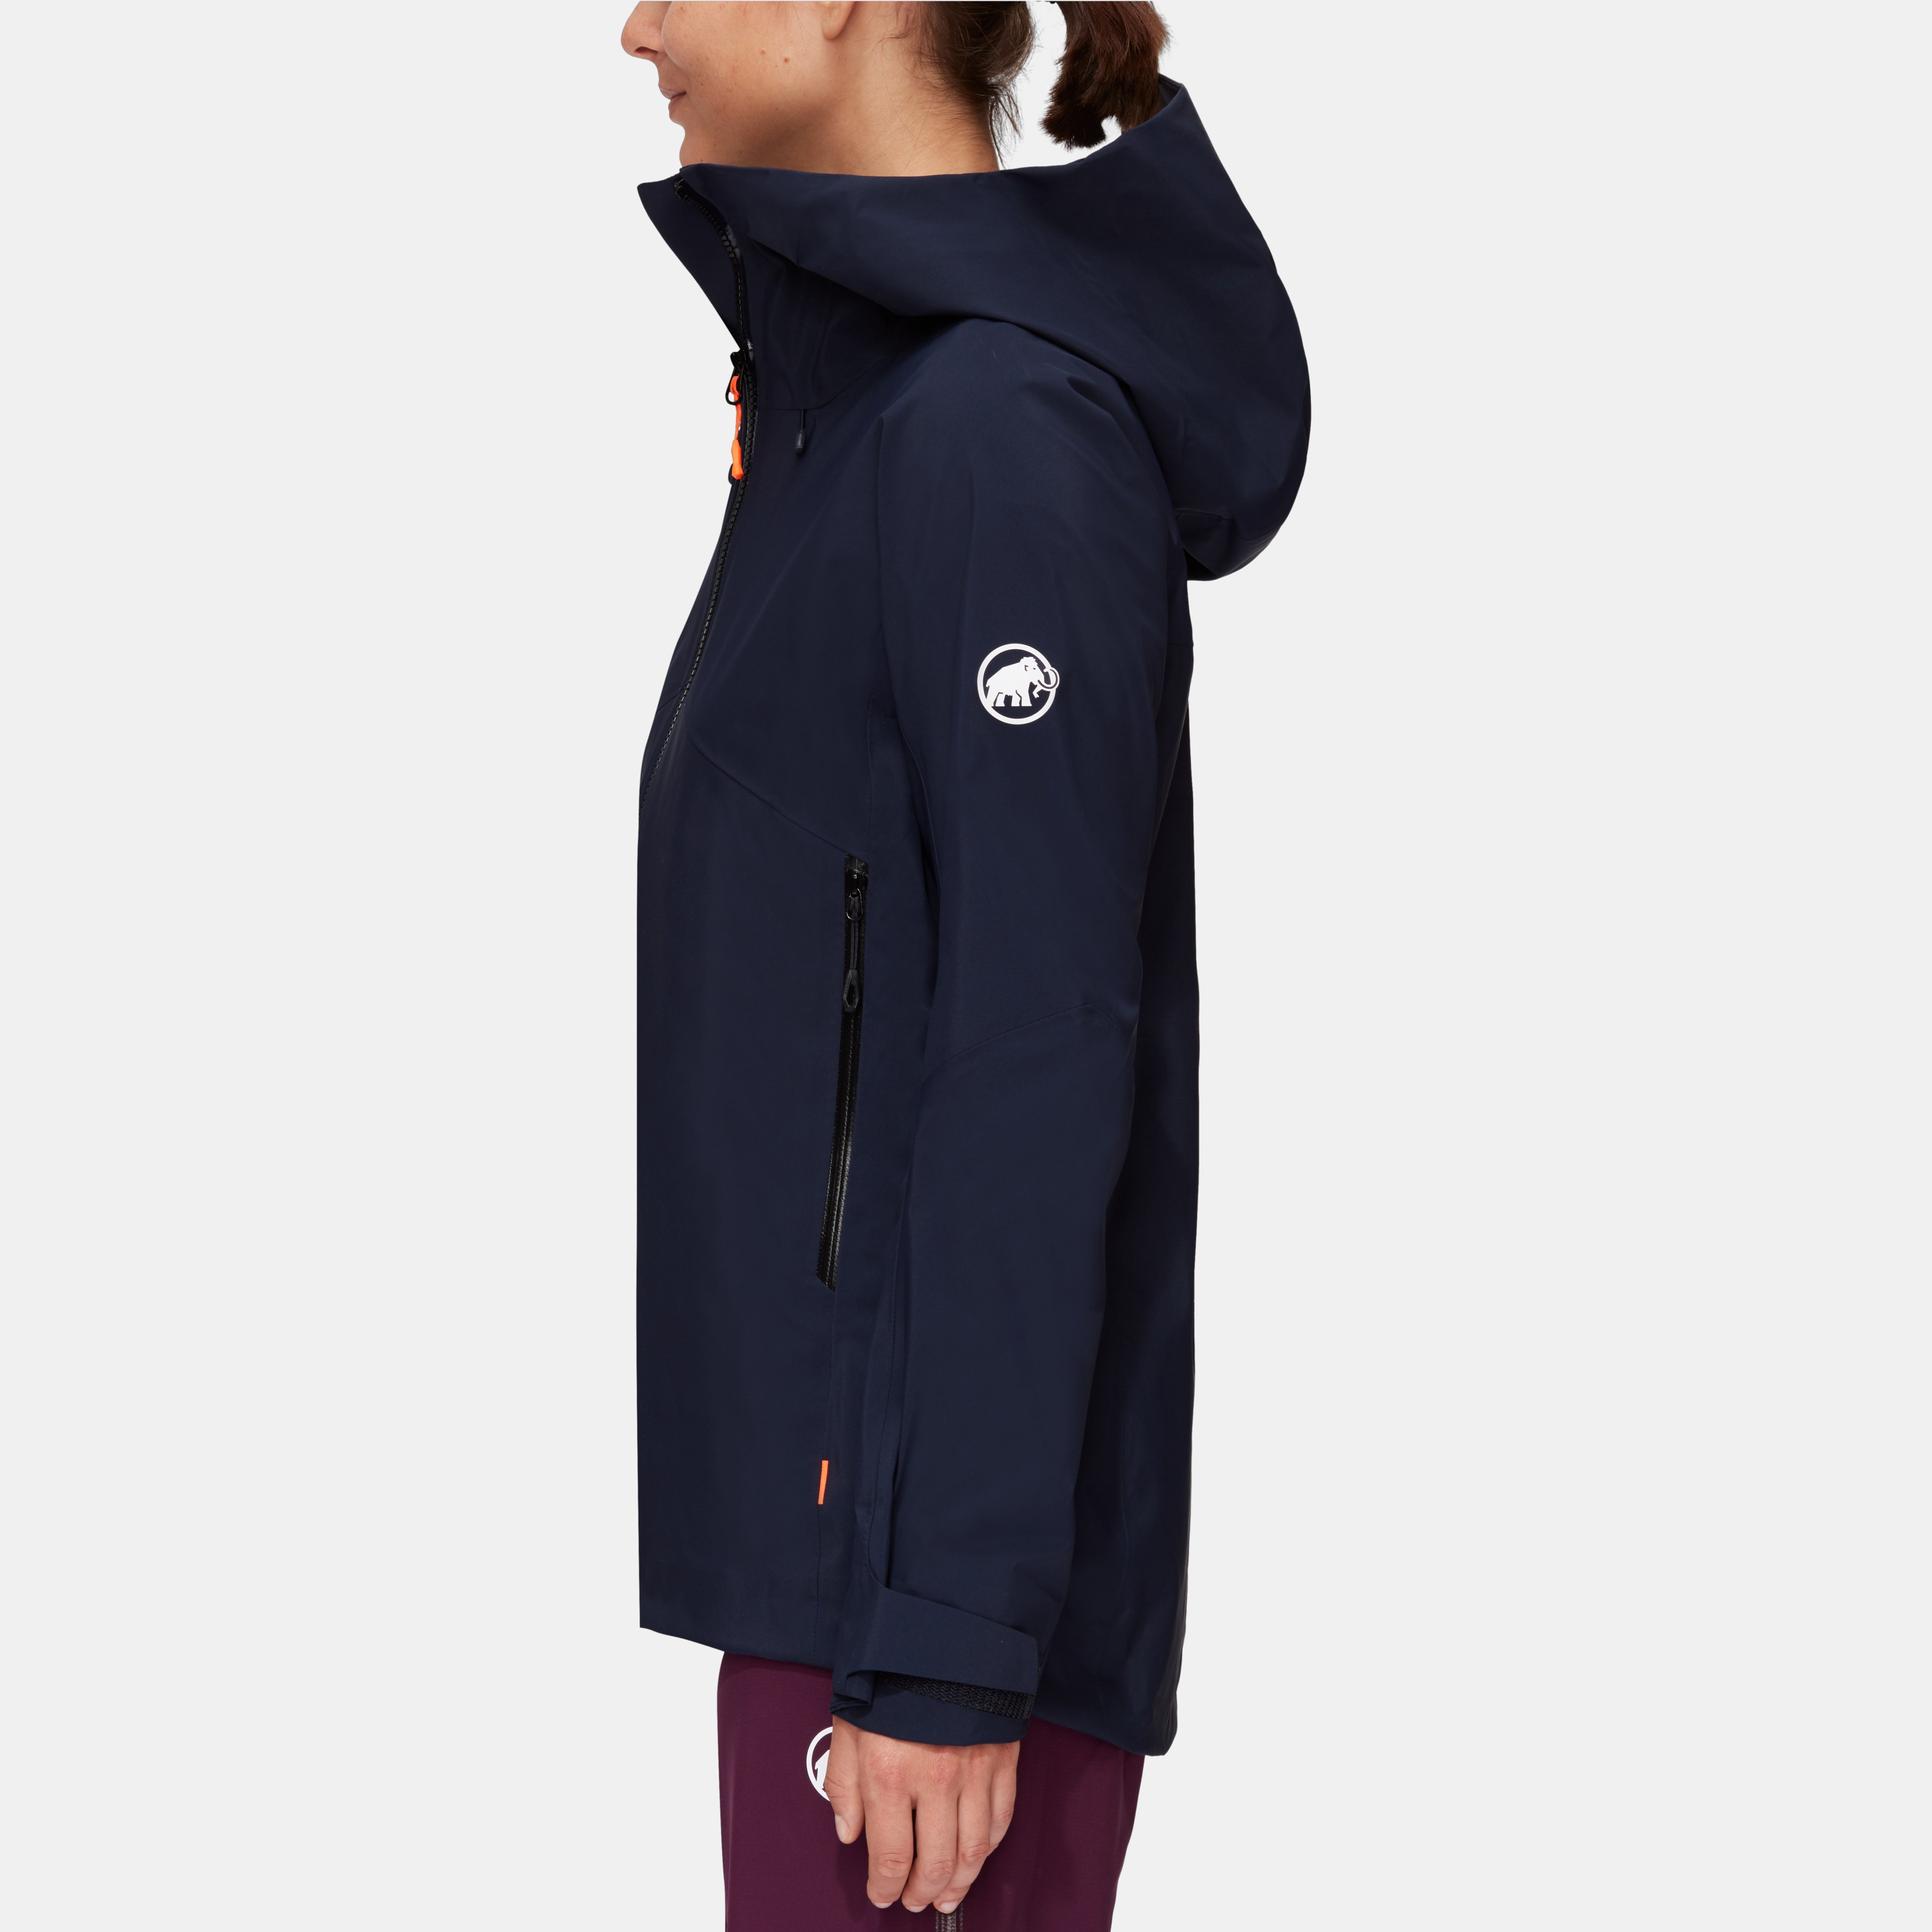 Crater Pro HS Hooded Jacket Women product image